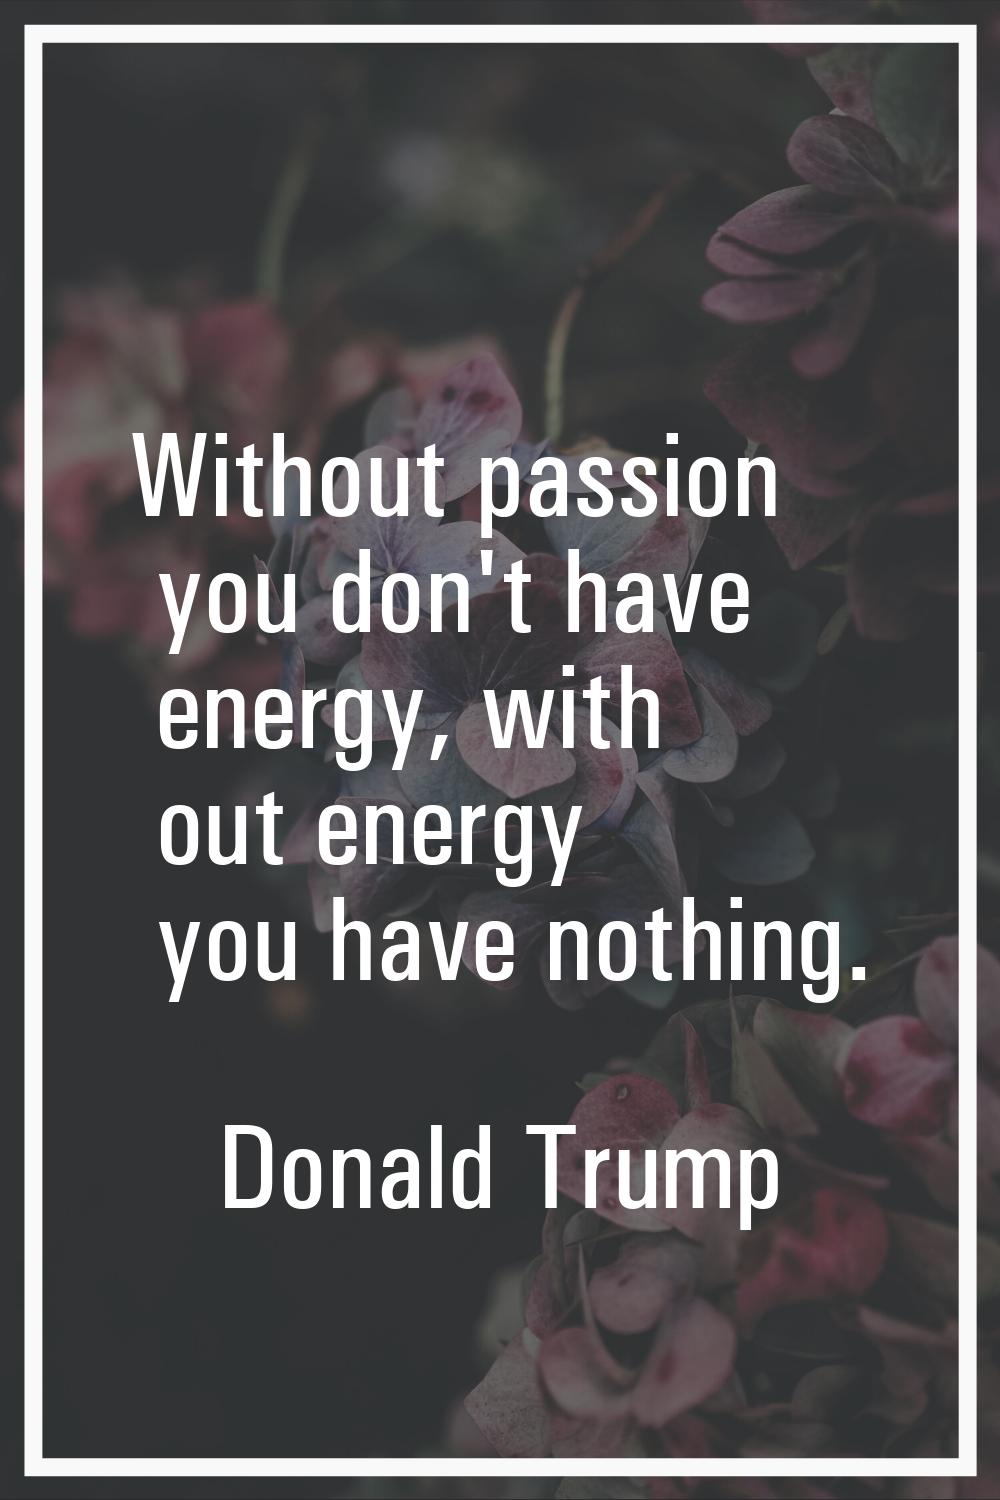 Without passion you don't have energy, with out energy you have nothing.